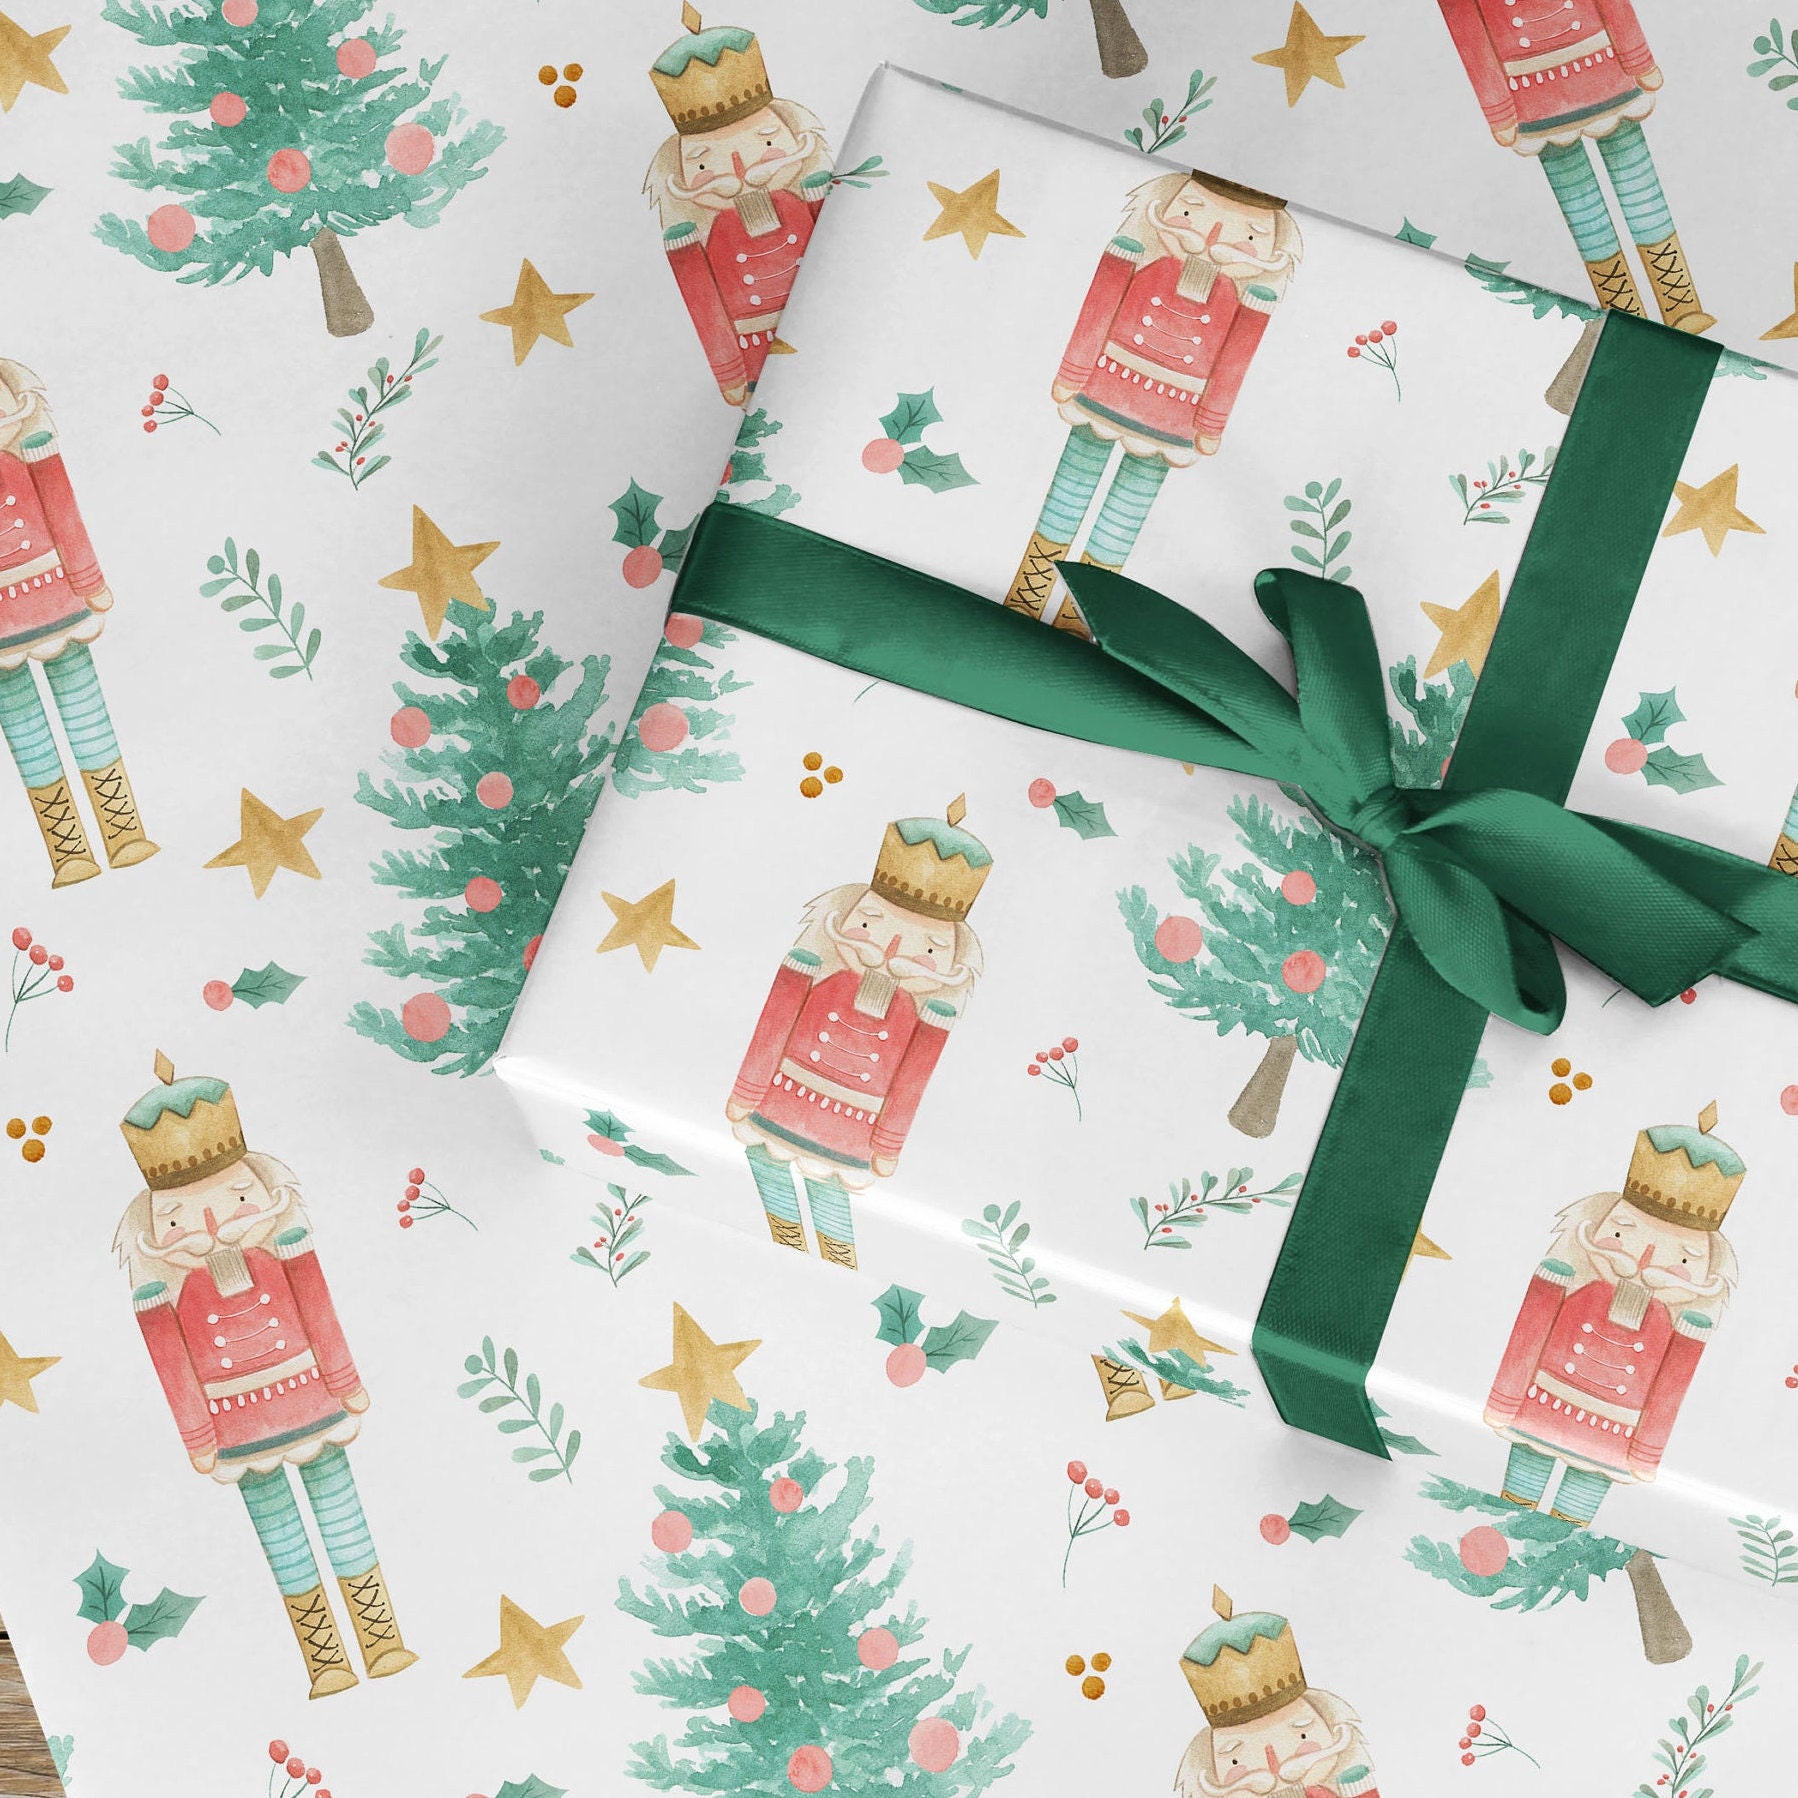 Christmas Wrapping Paper Roll UK, Christmas Girl Wrapping Paper, Rabbit Wrapping  Paper, Christmas Rabbit Gift, Baby Xmas Gift Wrap for Girls 